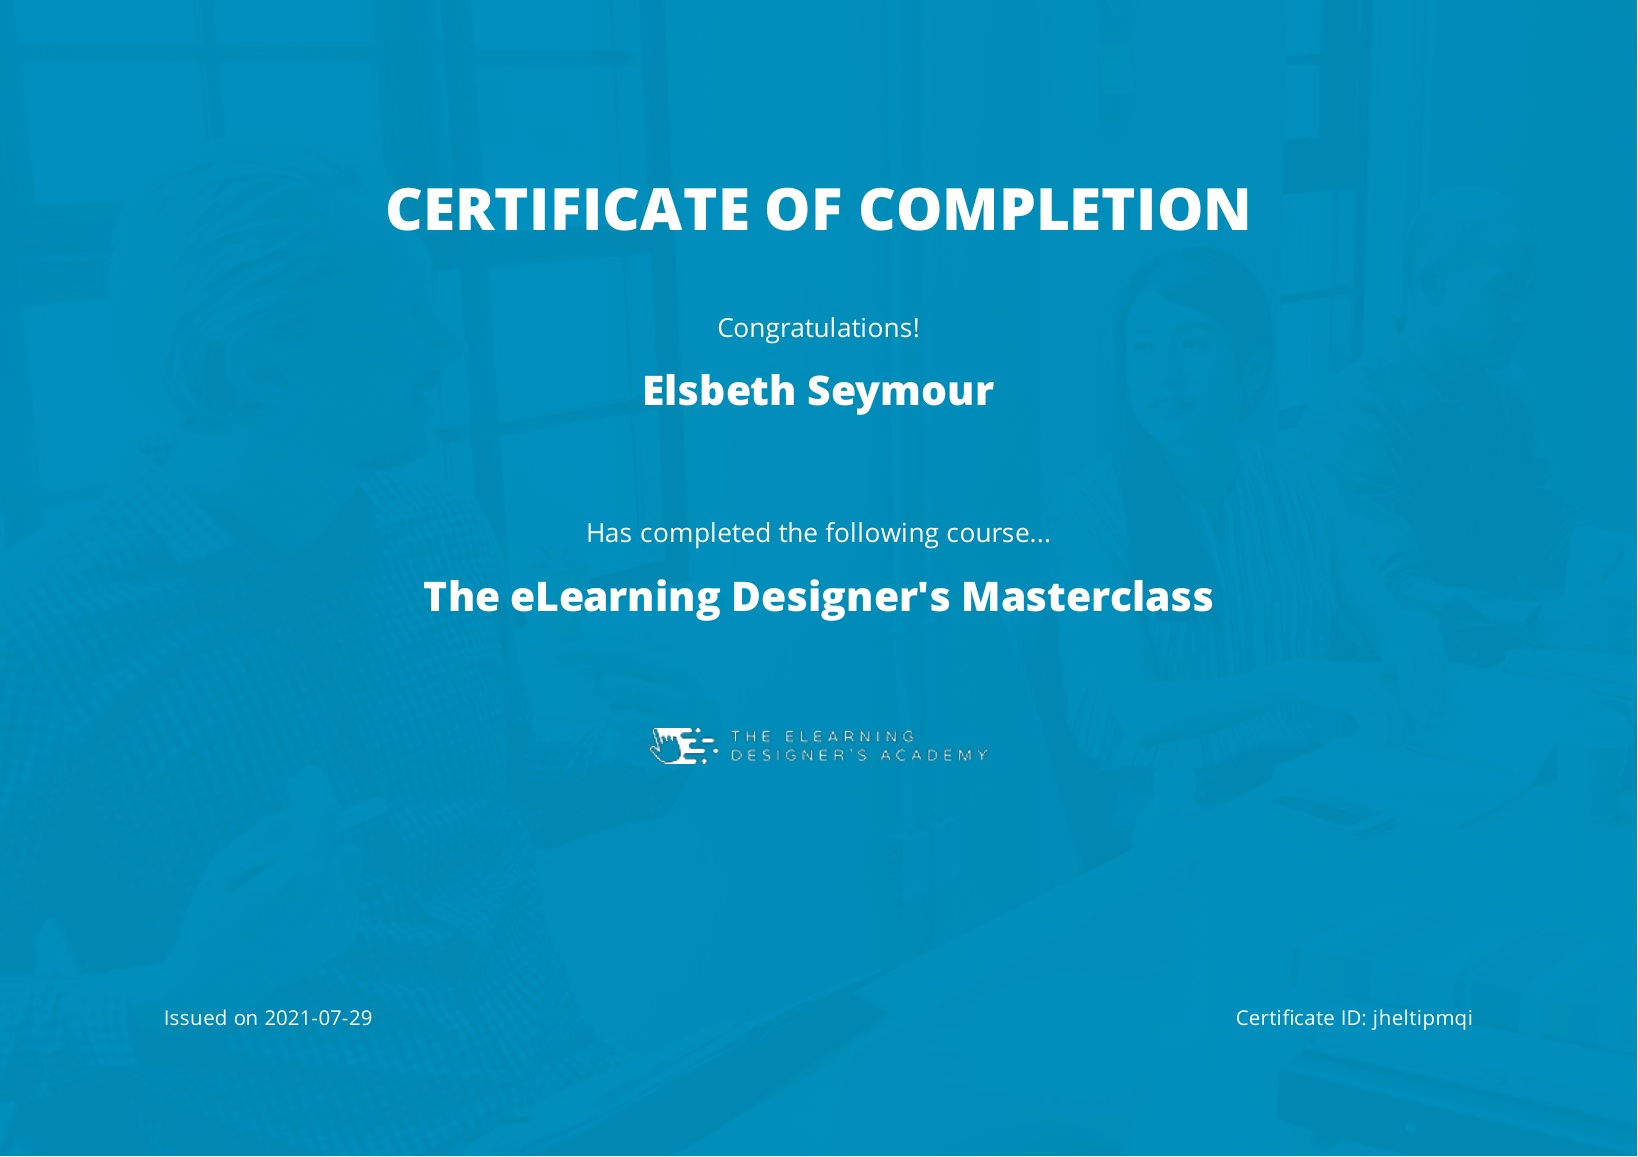 Certificate from completing Tim Slade's eLearning Designer's Masterclass